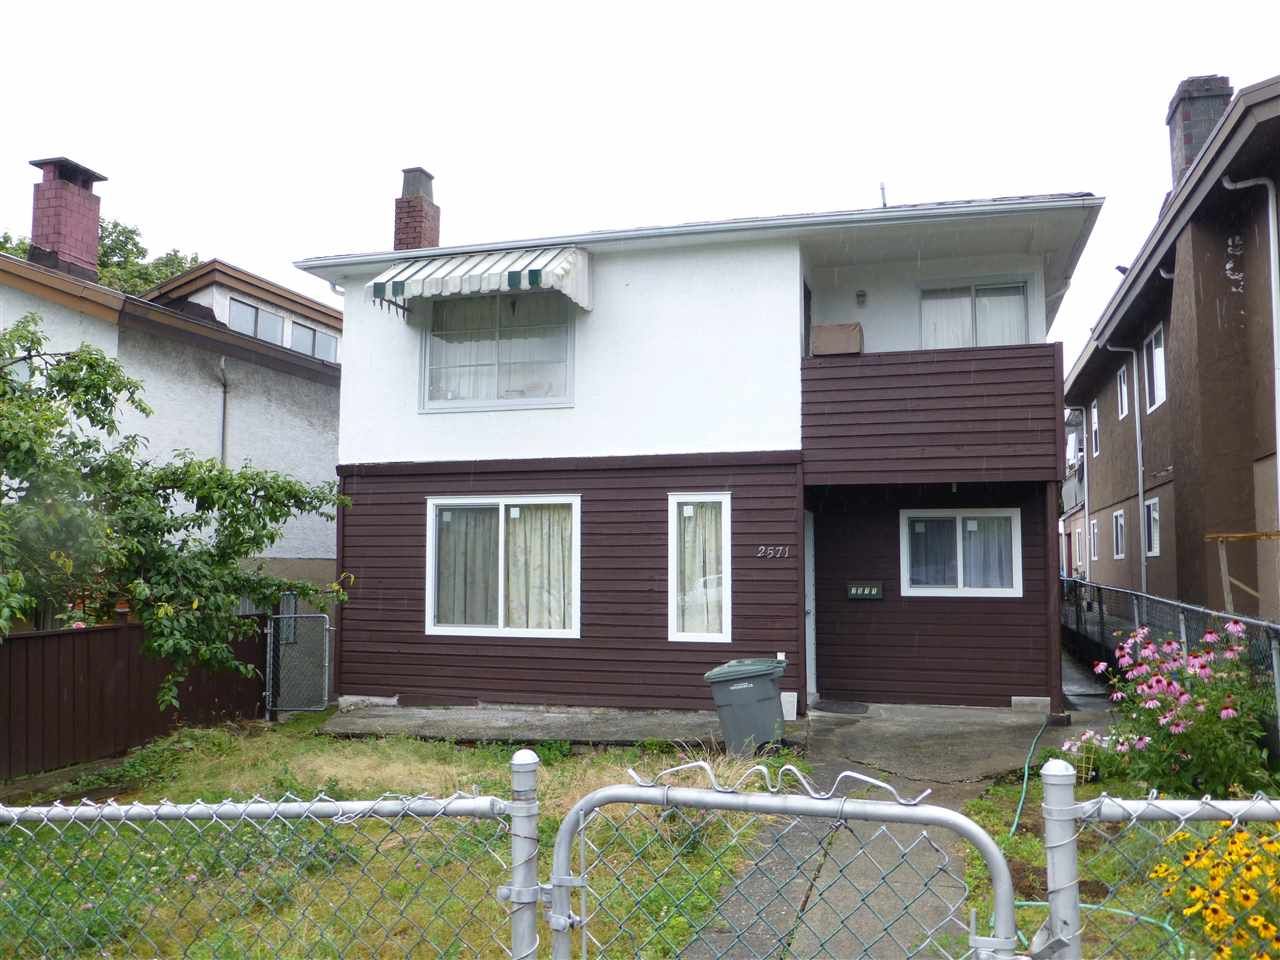 I have sold a property at 2571 RENFREW ST in Vancouver
